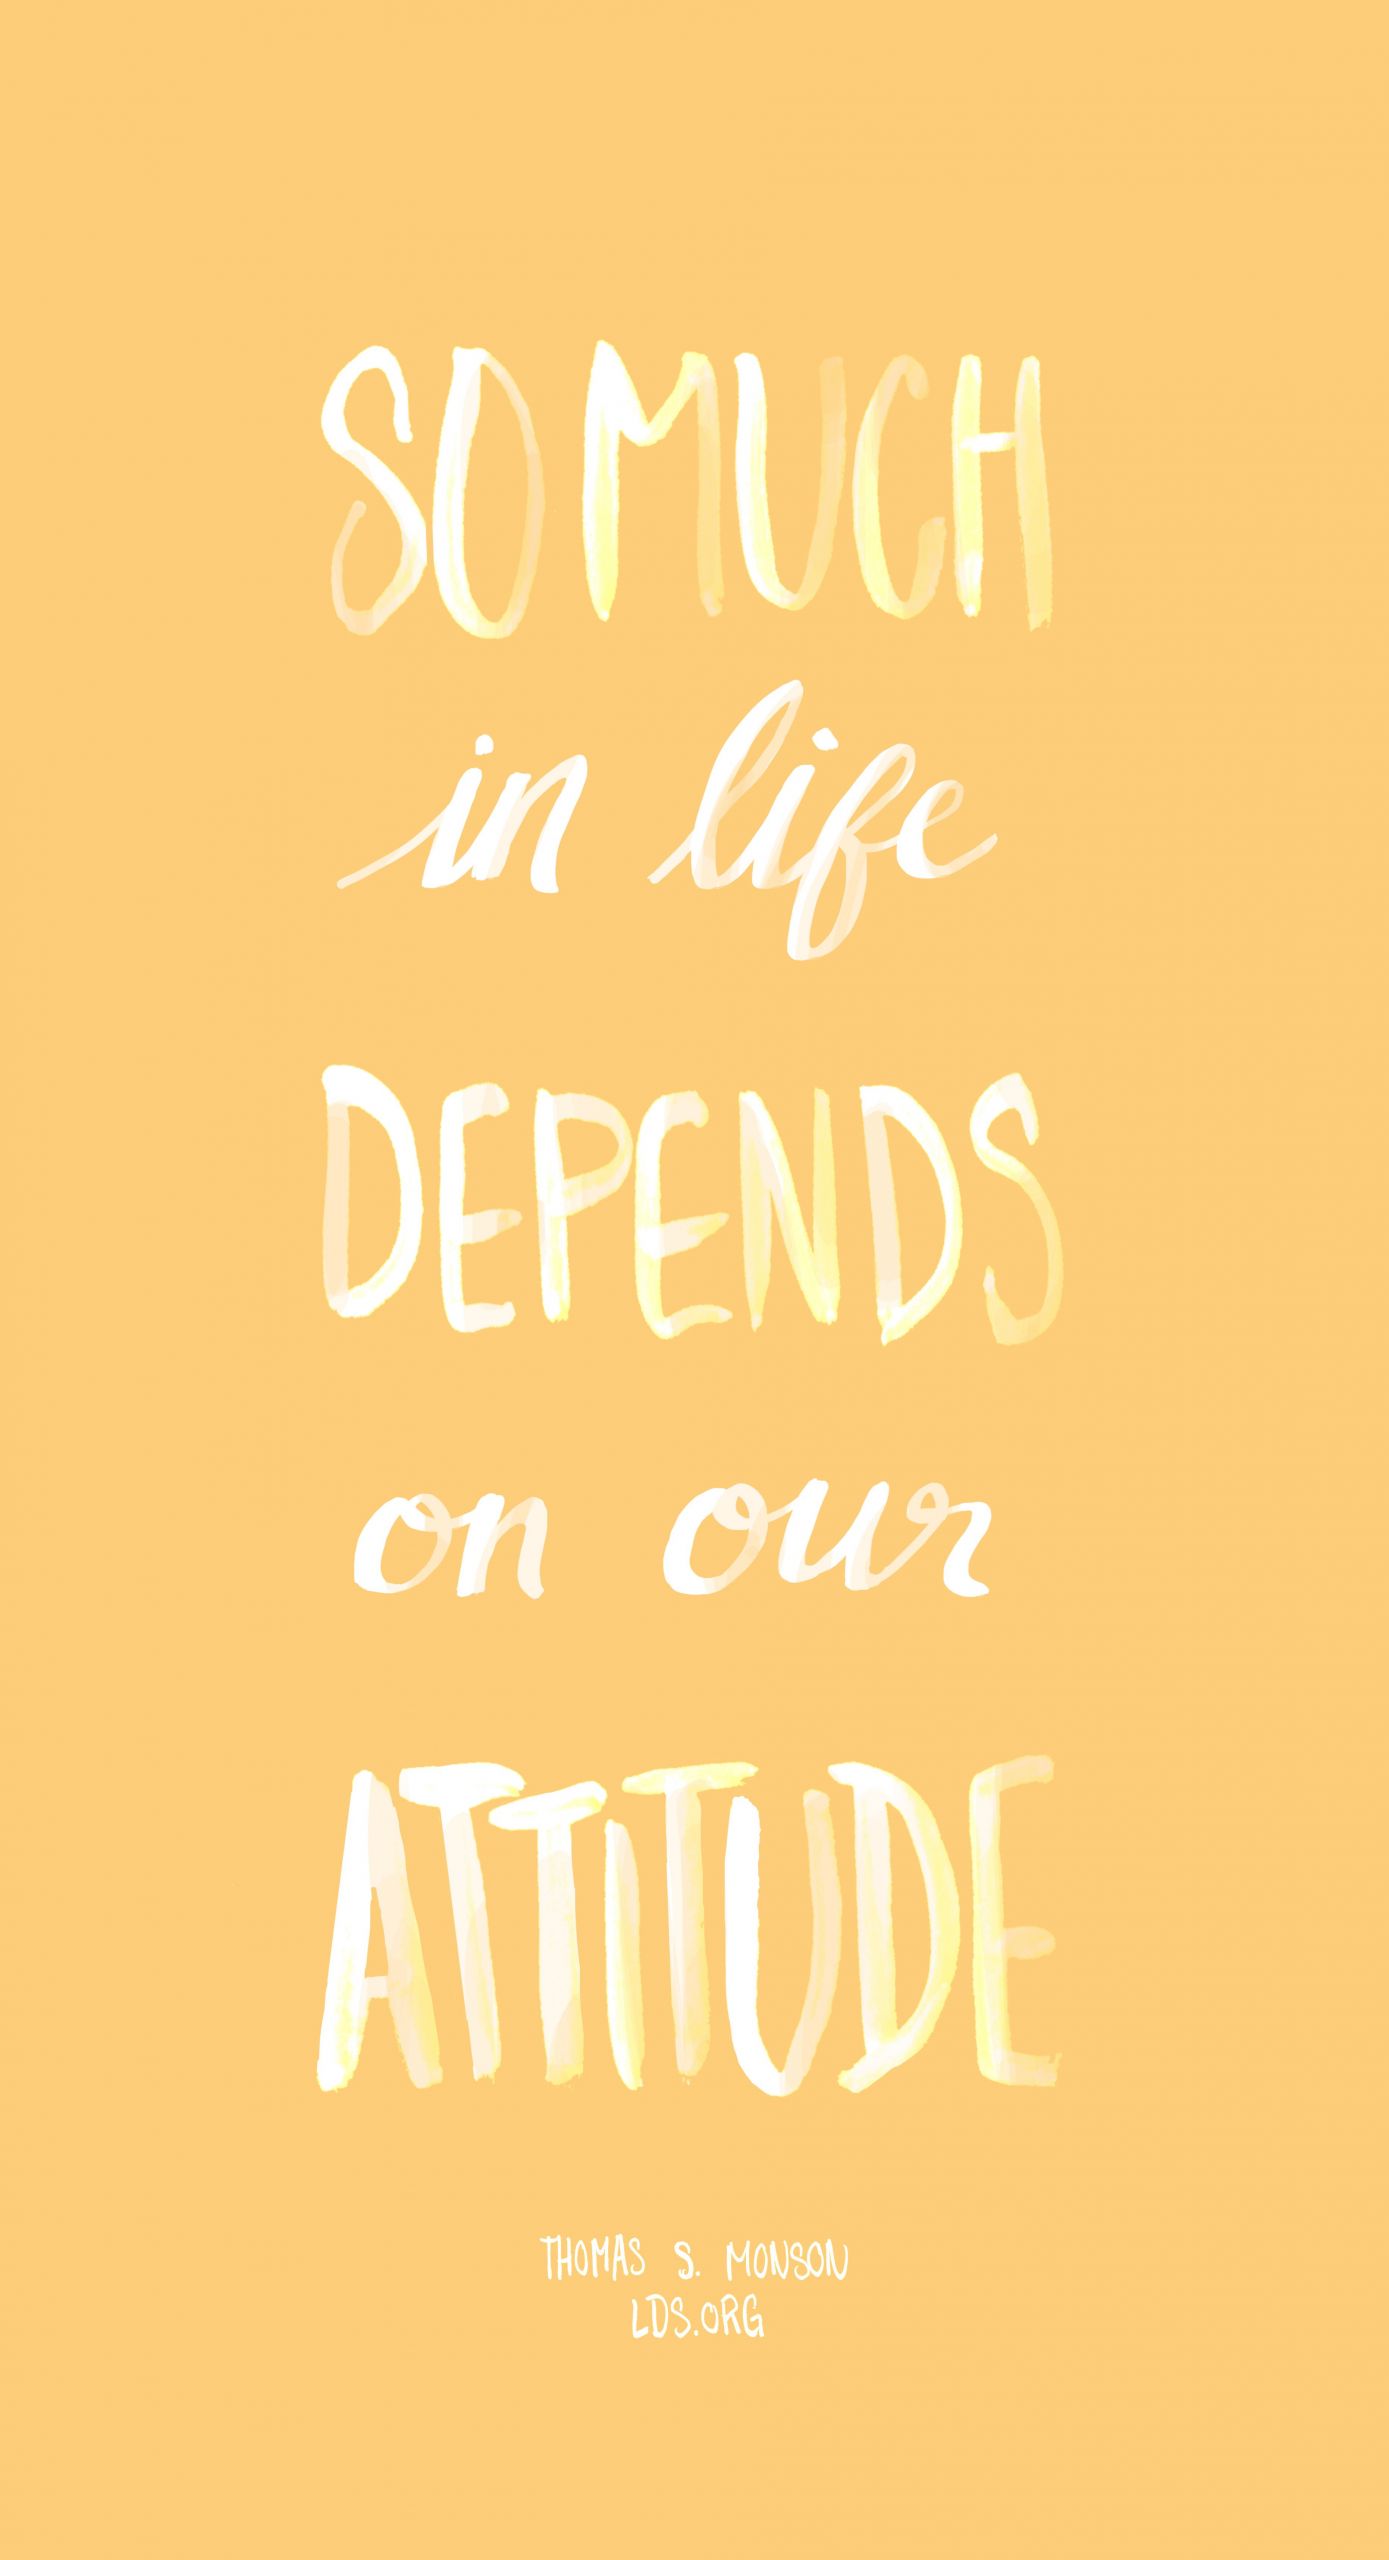 Lds Motivational Quotes
 So much in life depends on our attitude —Thomas S Monson